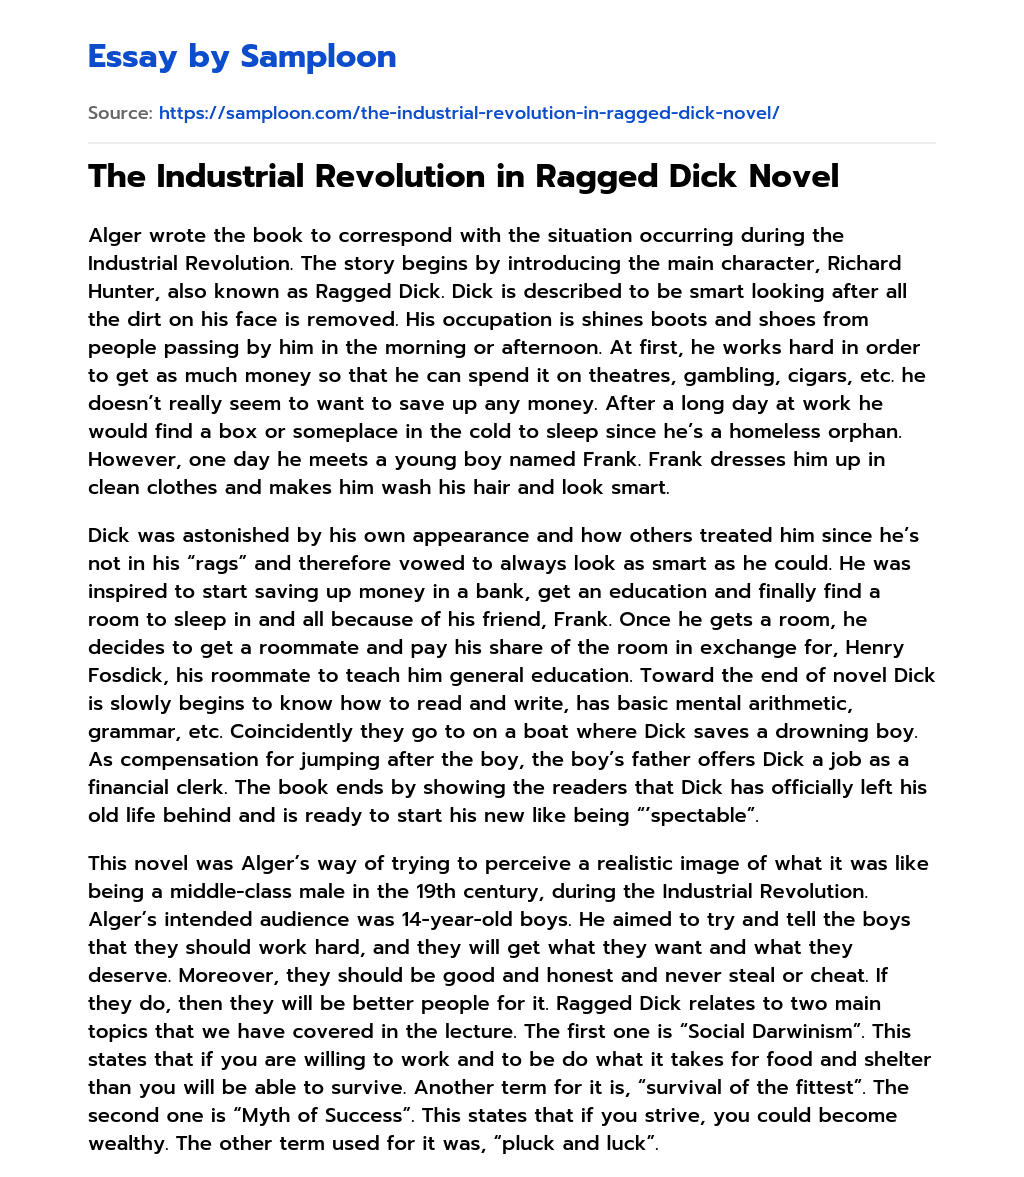 The Industrial Revolution in Ragged Dick Novel essay